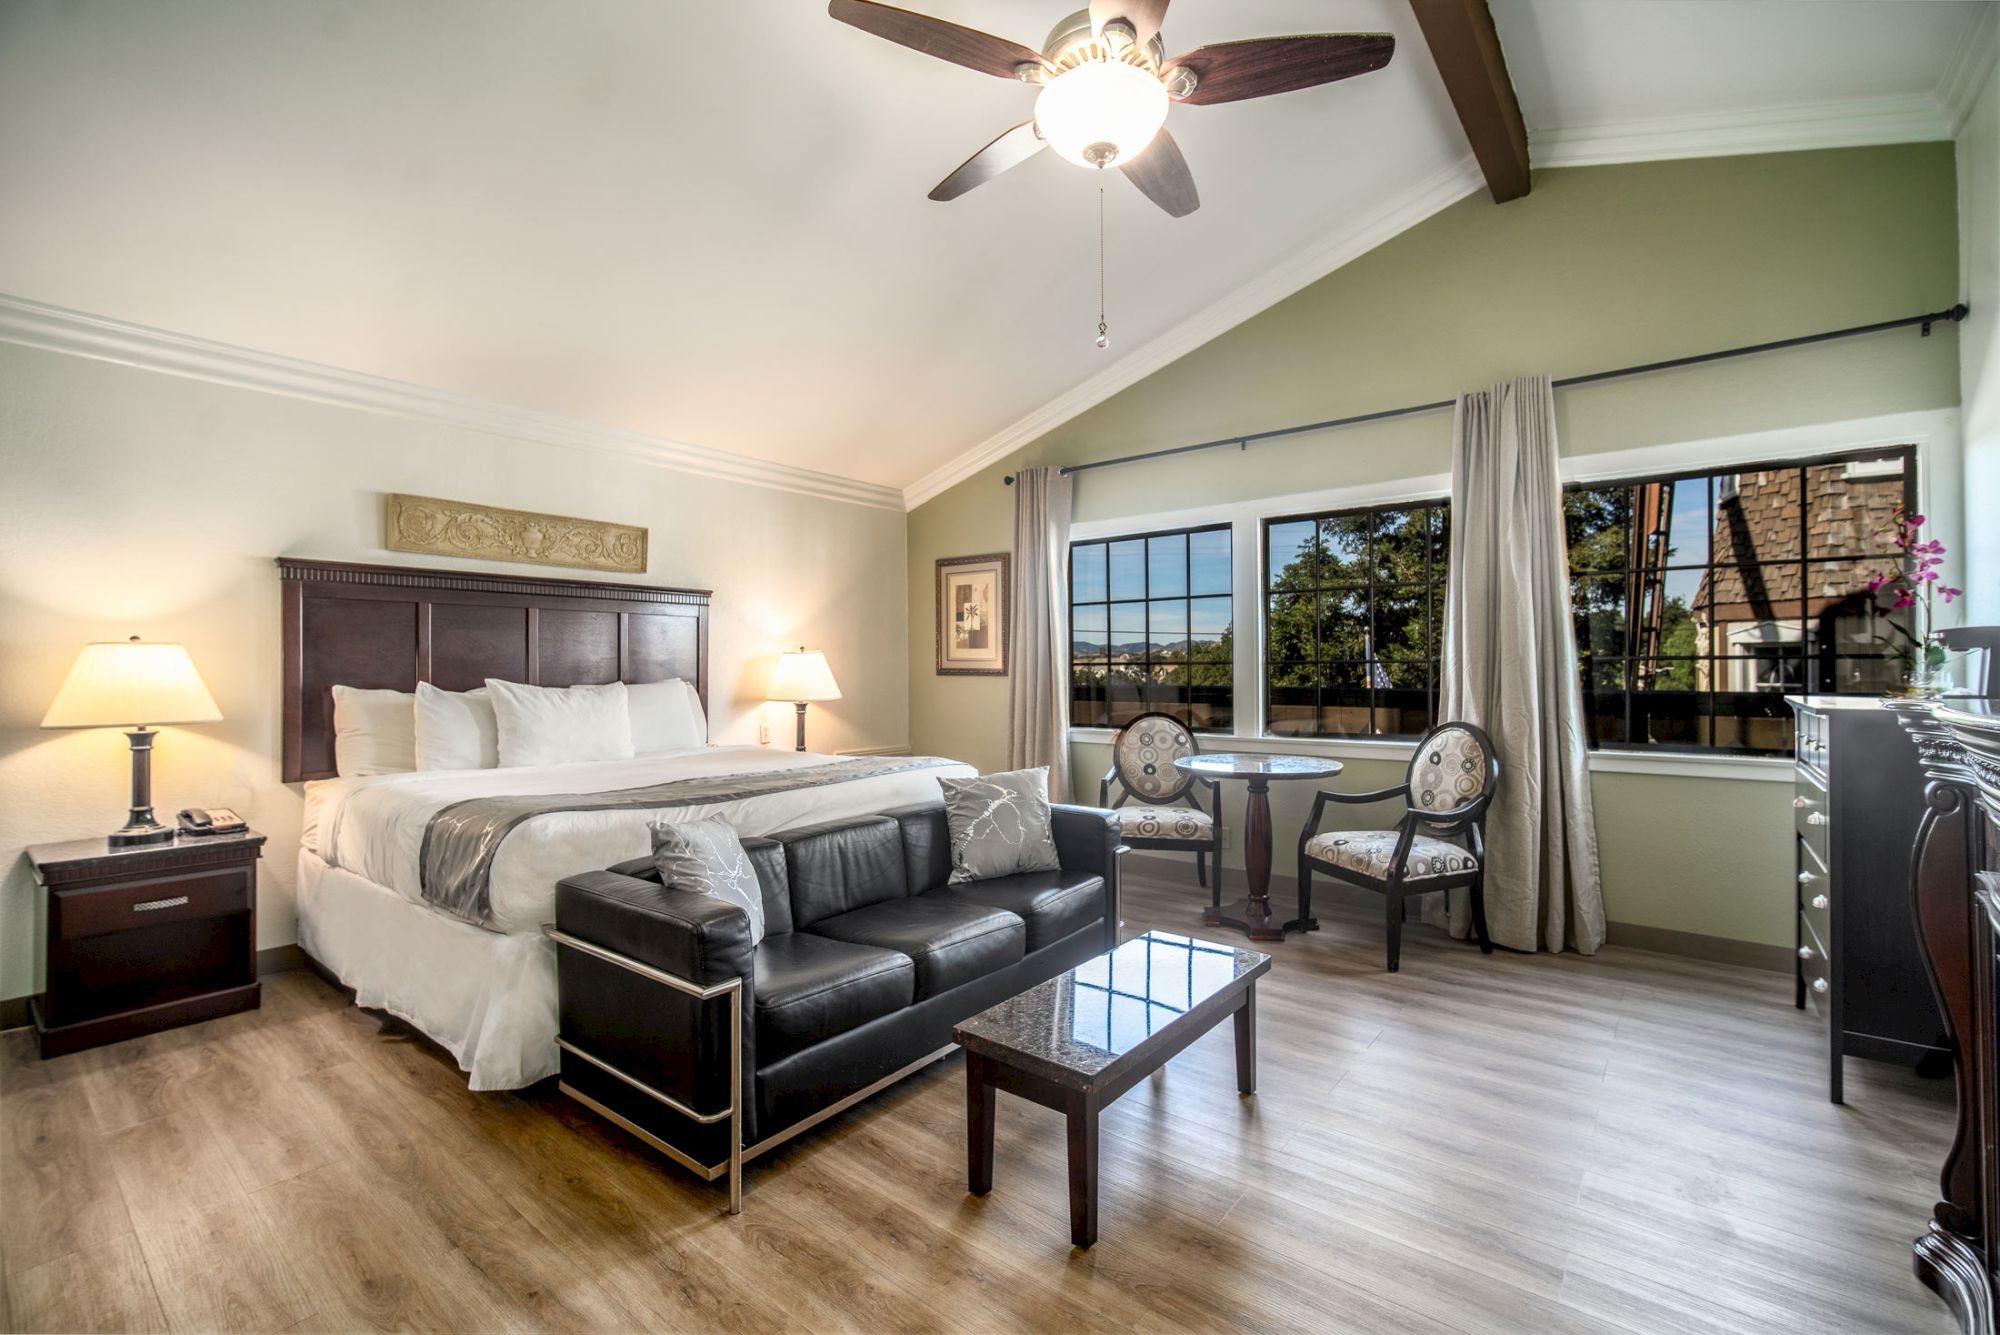 A spacious, well-lit bedroom features a king-size bed, sofa, coffee table, small dining set, and large windows with natural light streaming in.